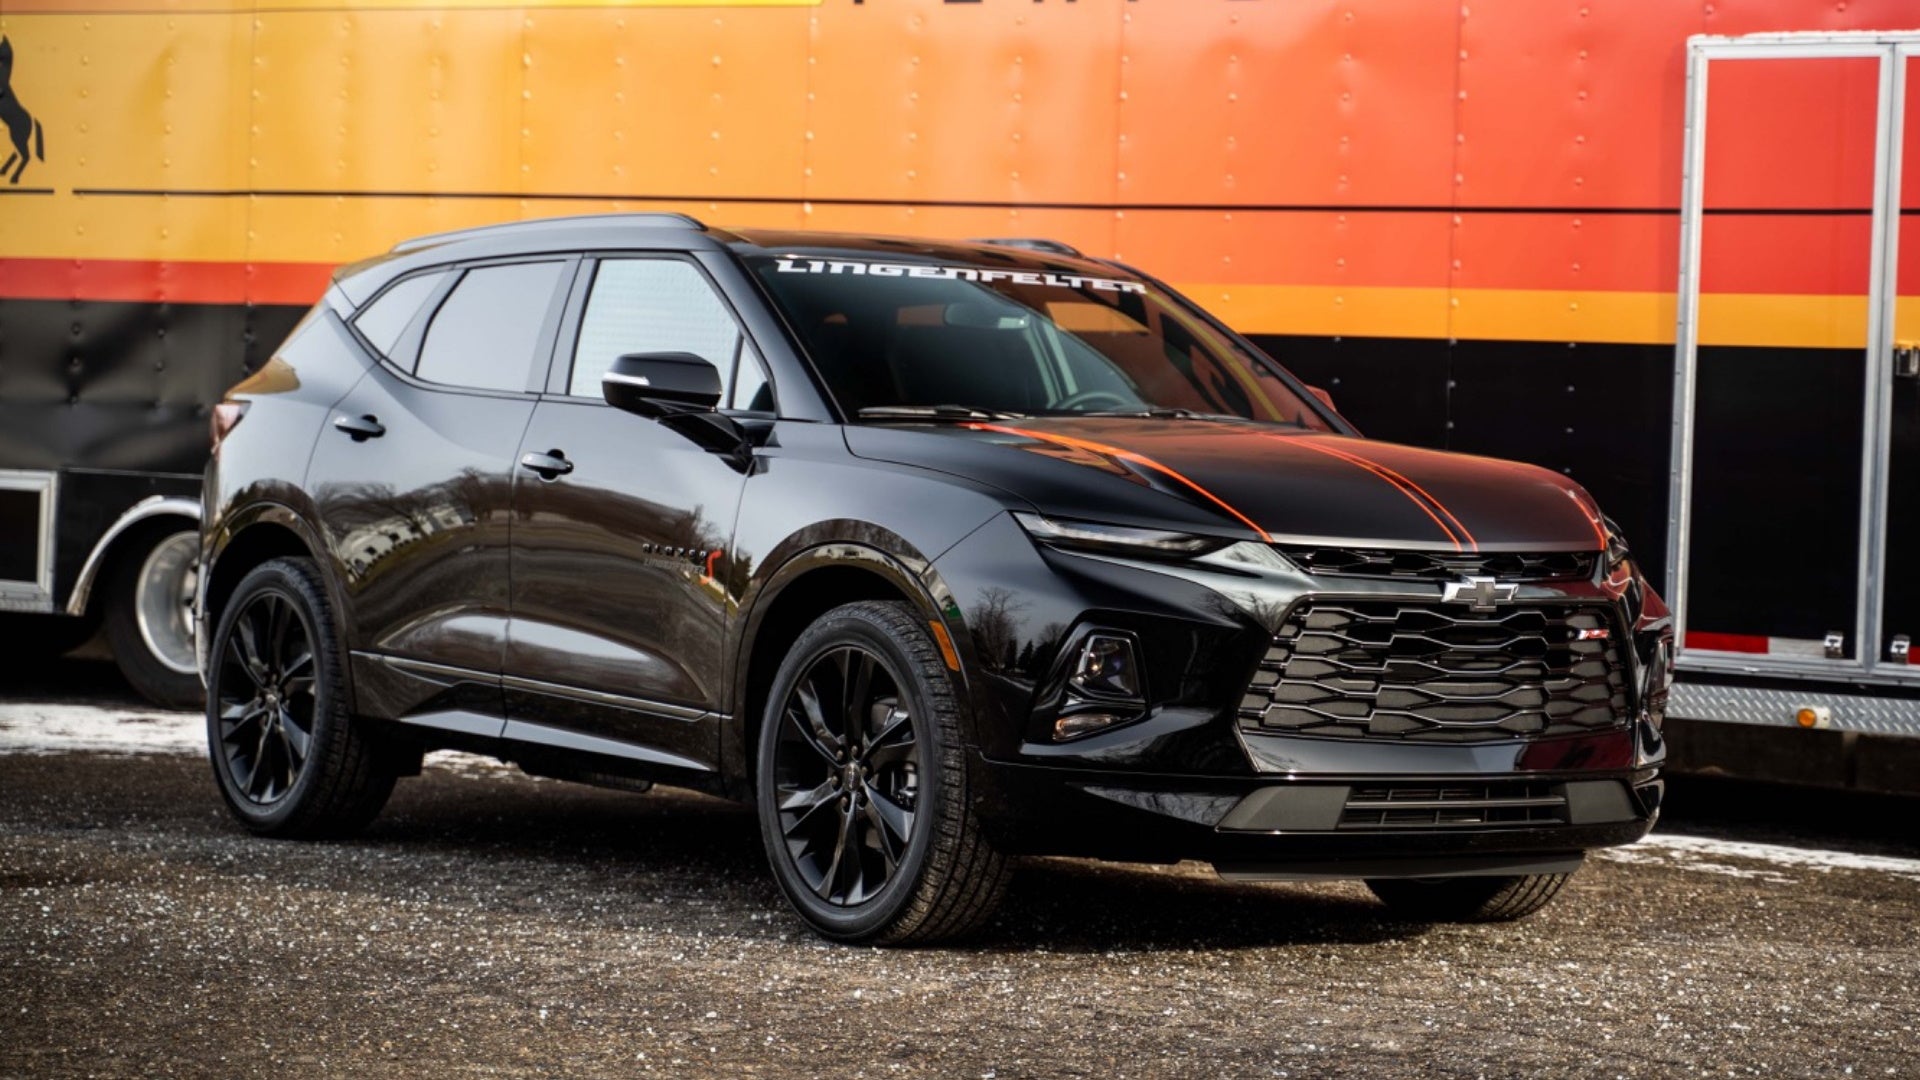 Think the New Chevy Blazer Crossover Is Meh? Give It 450 HP With  Lingenfelter's Supercharger Kit